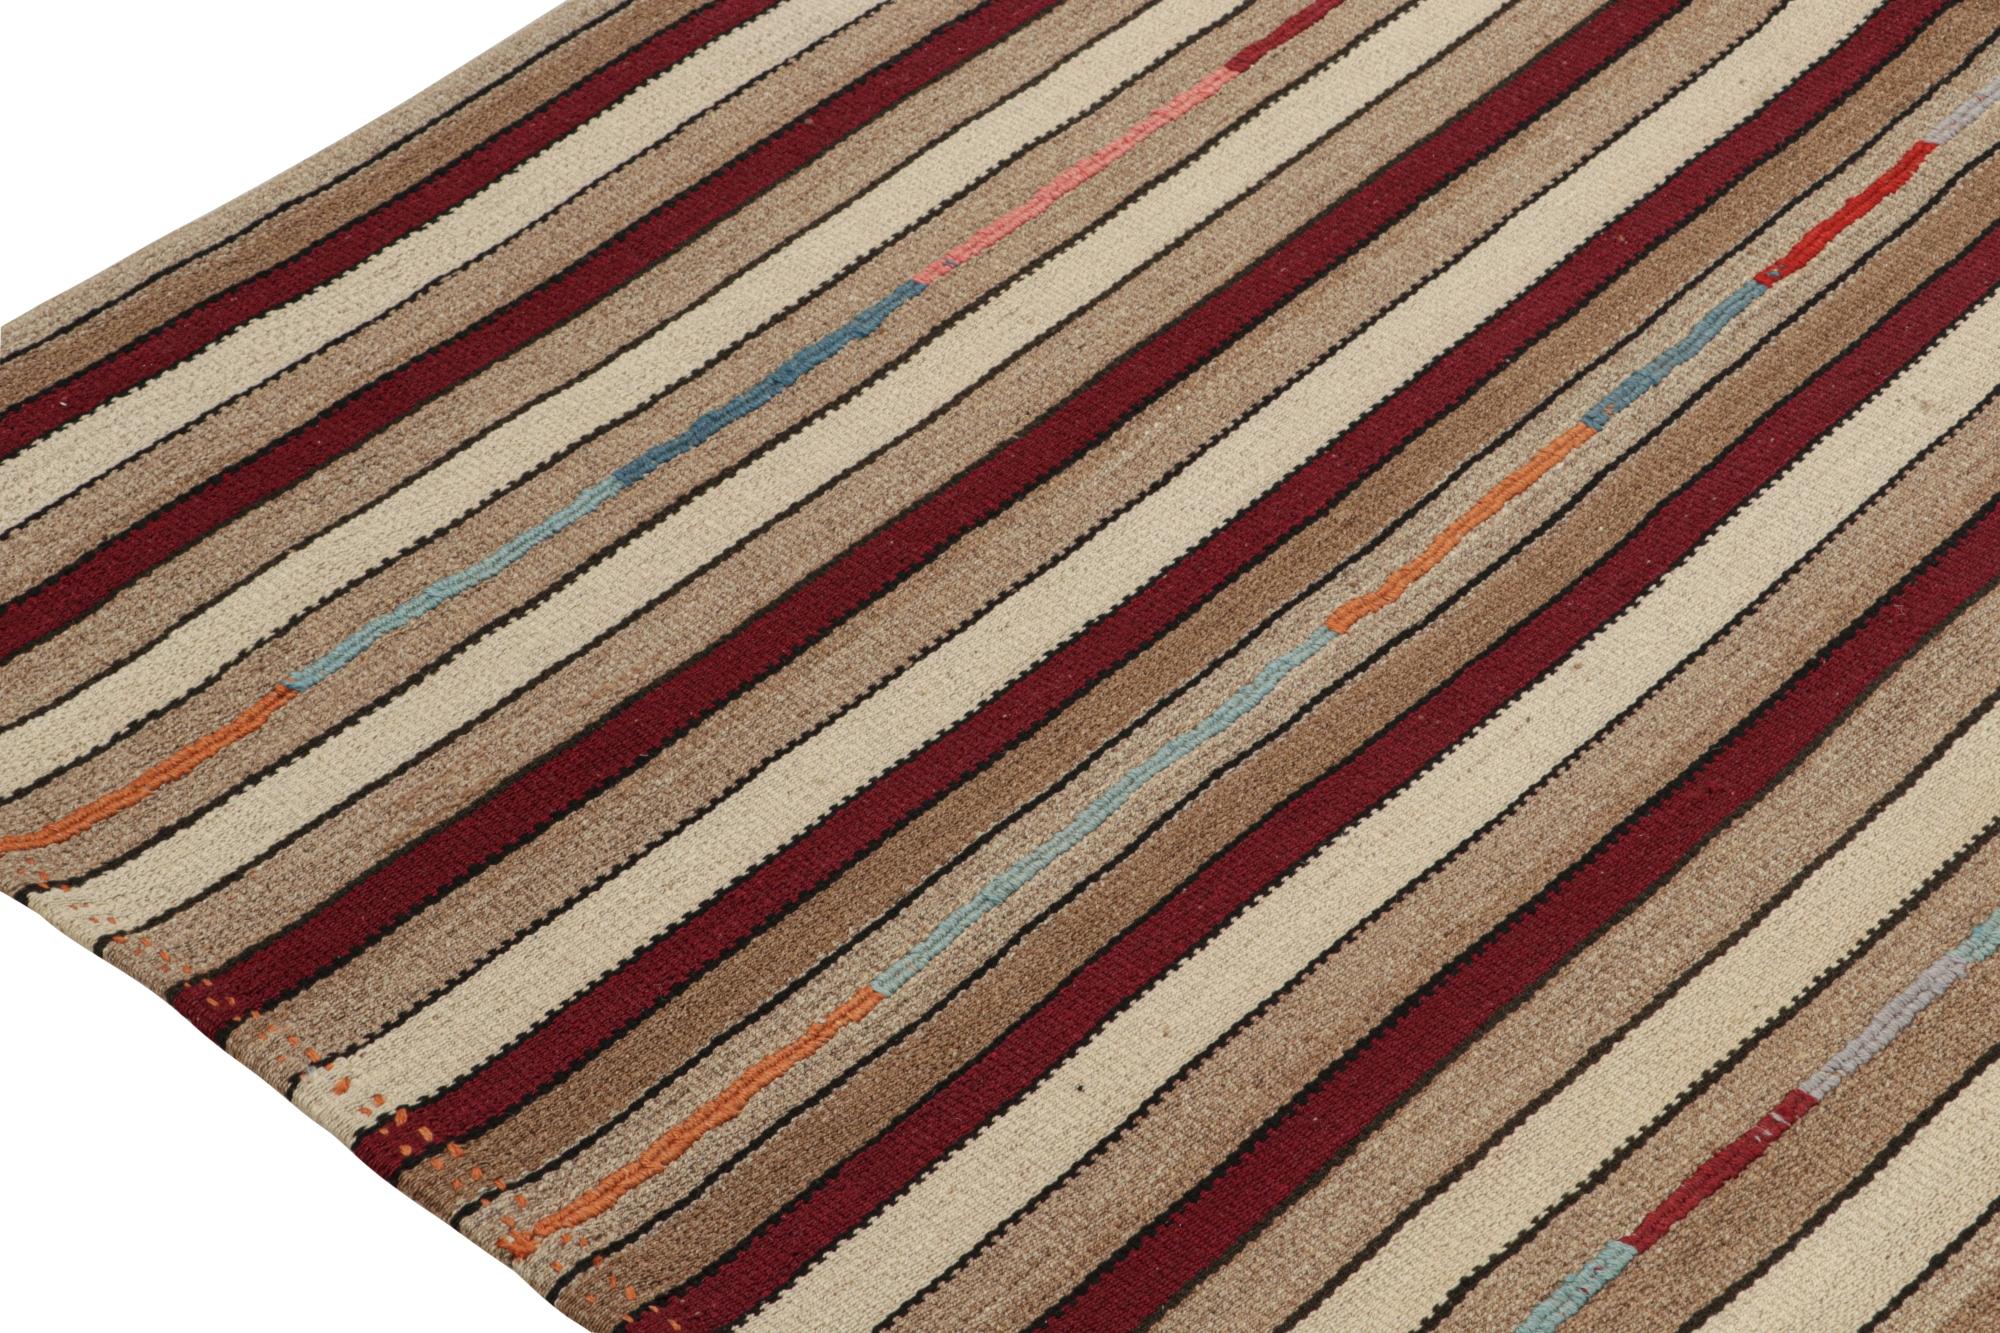 Mid-20th Century Vintage Shahsavan Palas Persian Kilim in Red, Beige-Brown Stripes For Sale